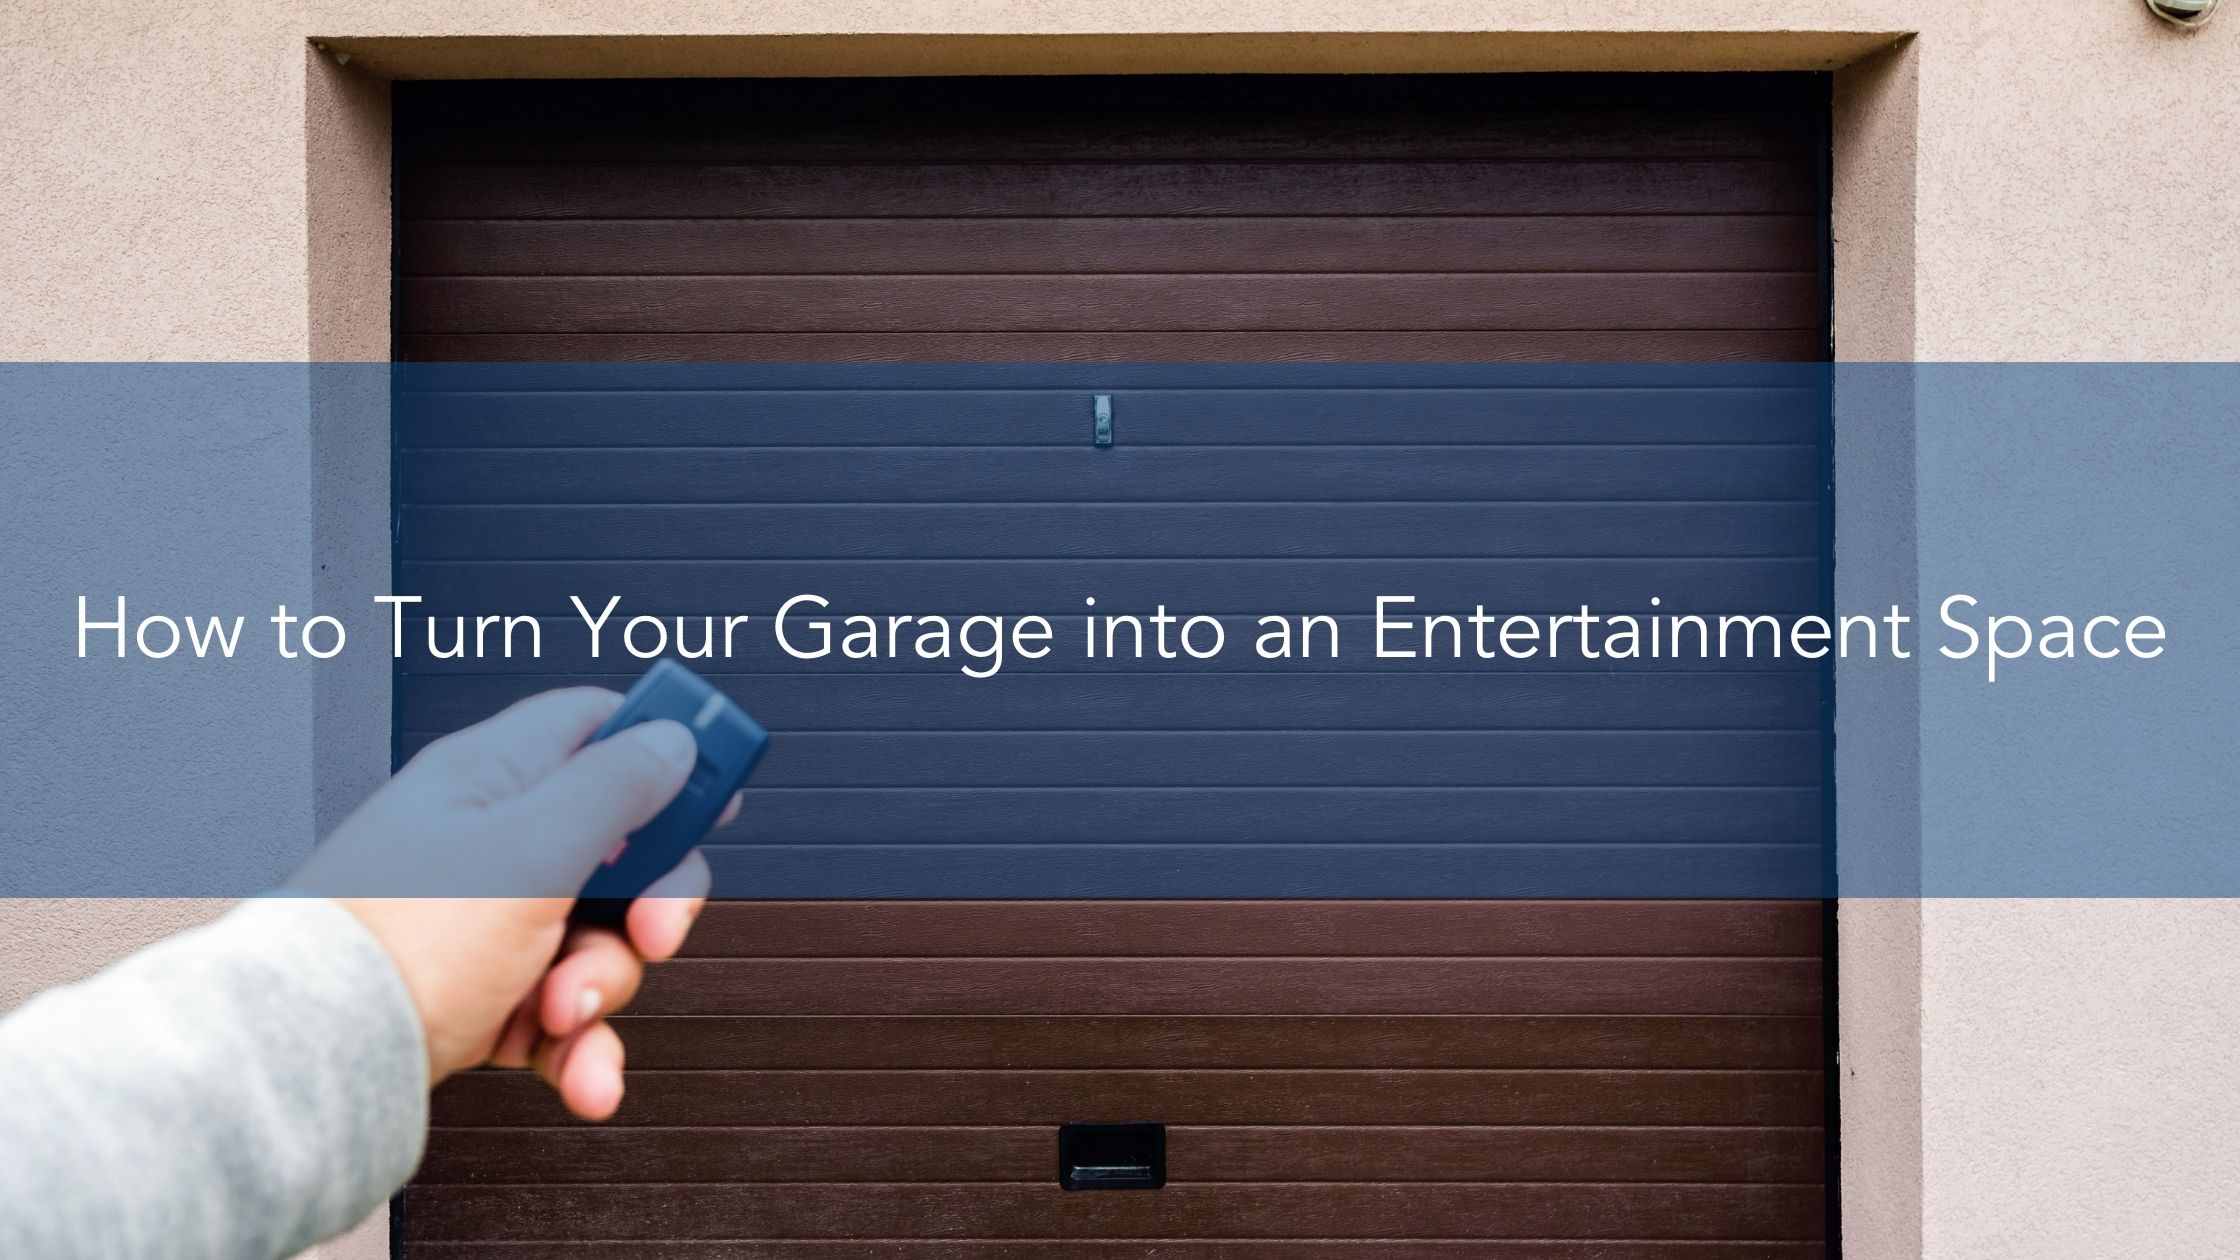 How to Turn Your Garage into an Entertainment Space